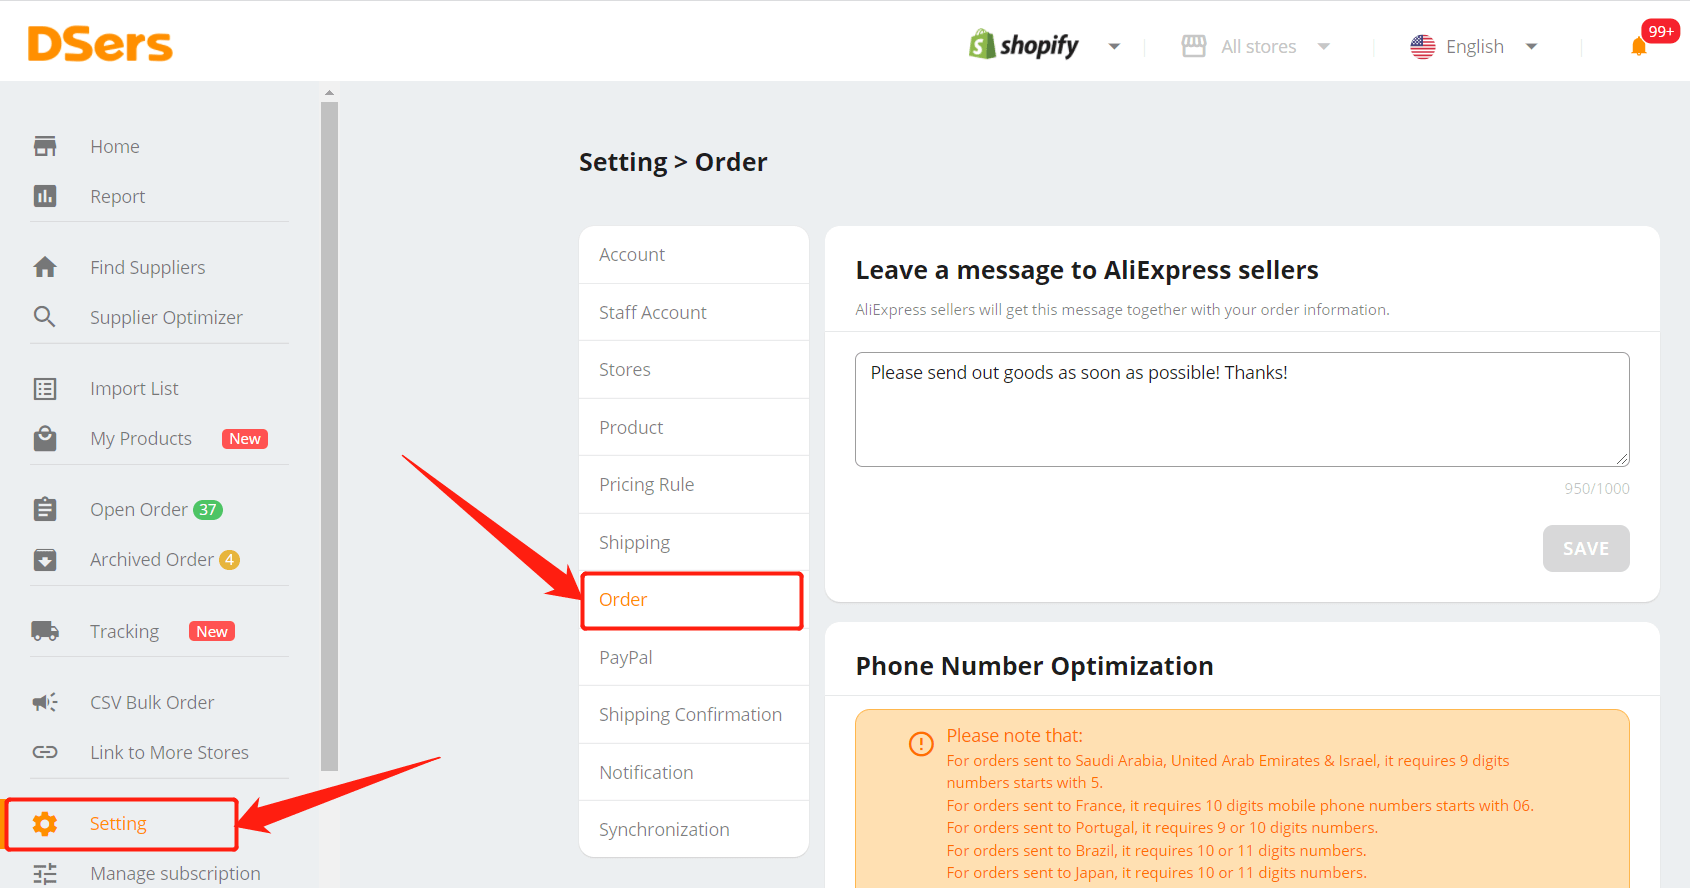 Re-order "Request Fulfillment" order - setting - Shopify DSers